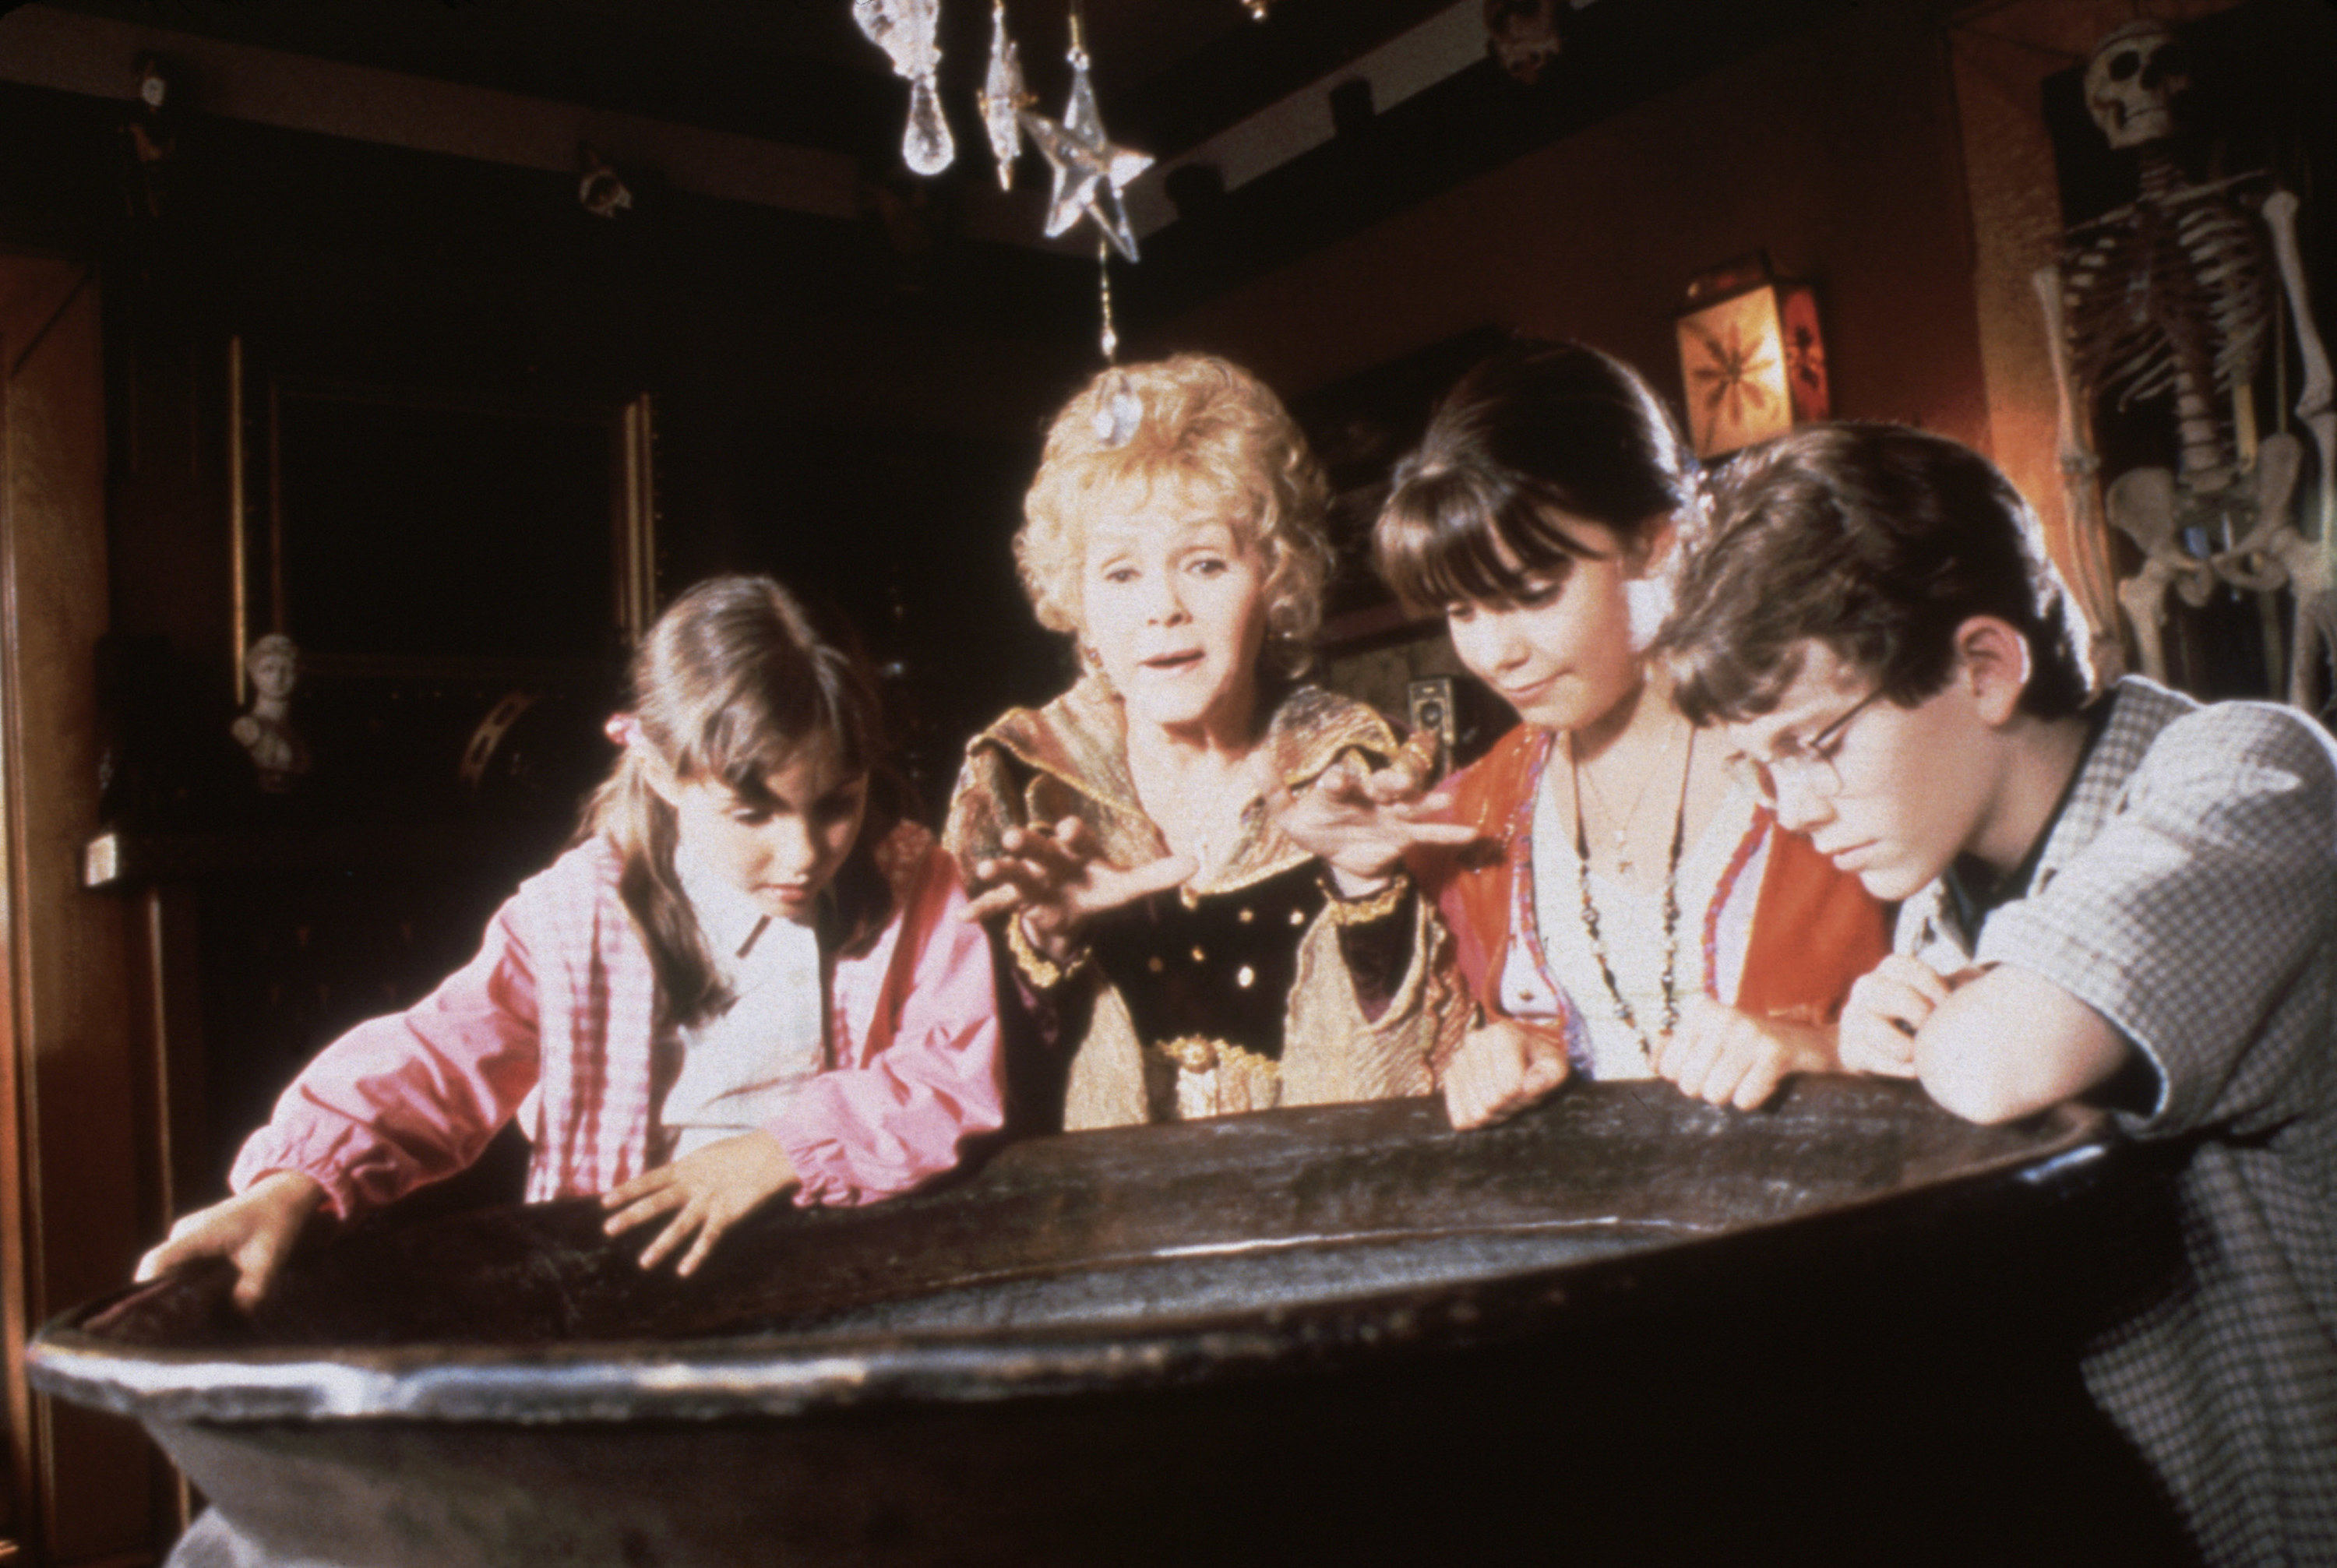 Debbie Reynolds stands around a cauldron with Emily Roeske, Kimberly J. Brown, and Joey Zimmerman